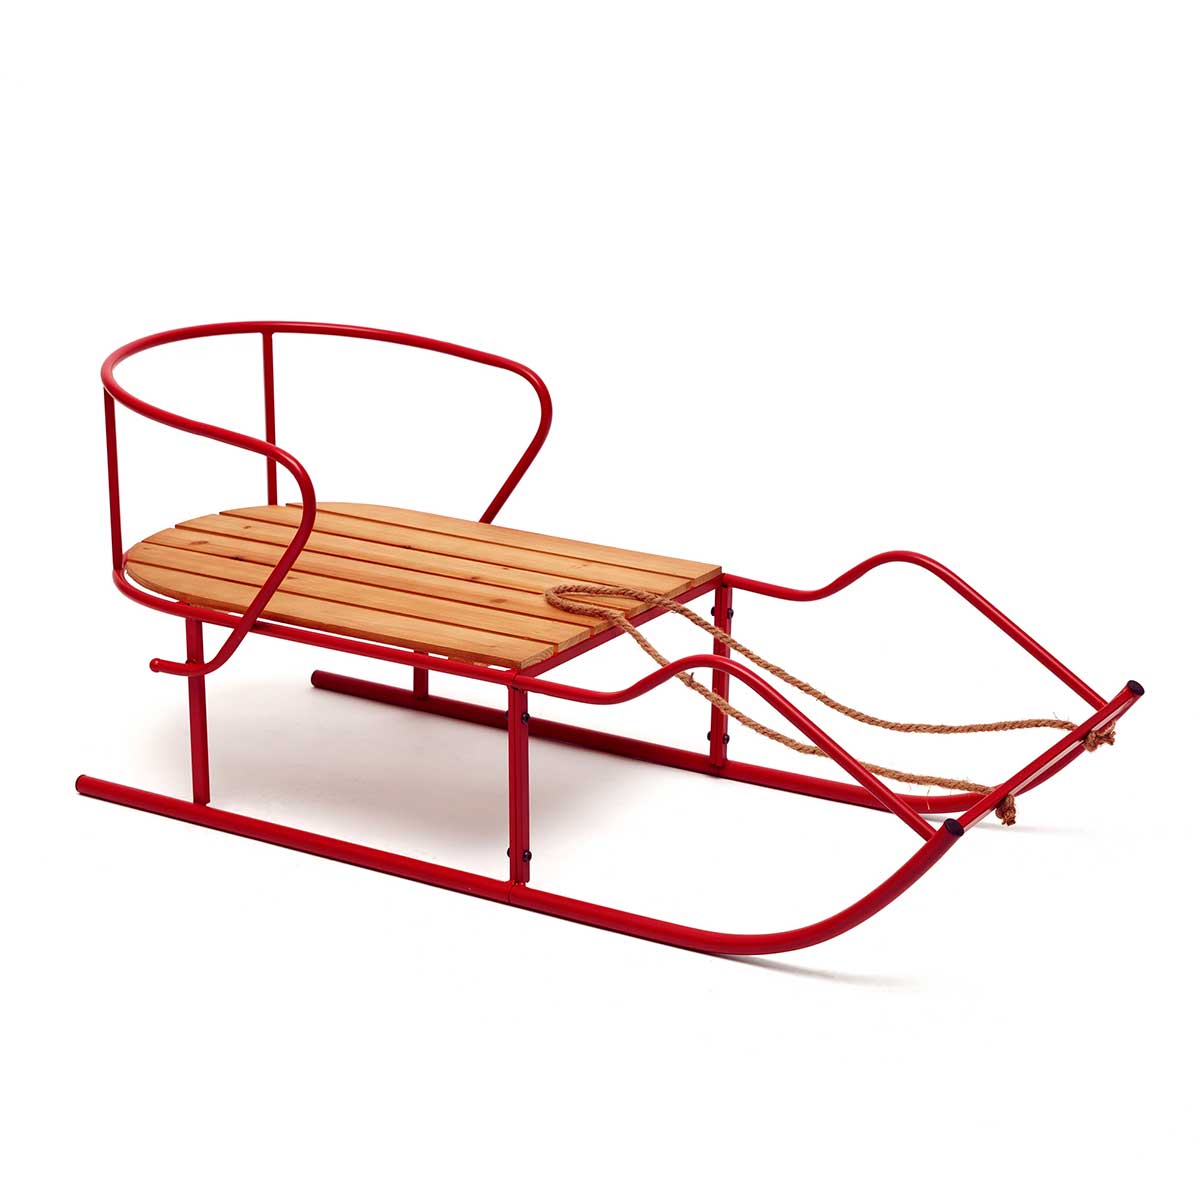 DOWNHILL SLEDDING METAL SLED RED WITH NATURAL WOOD SEACHT